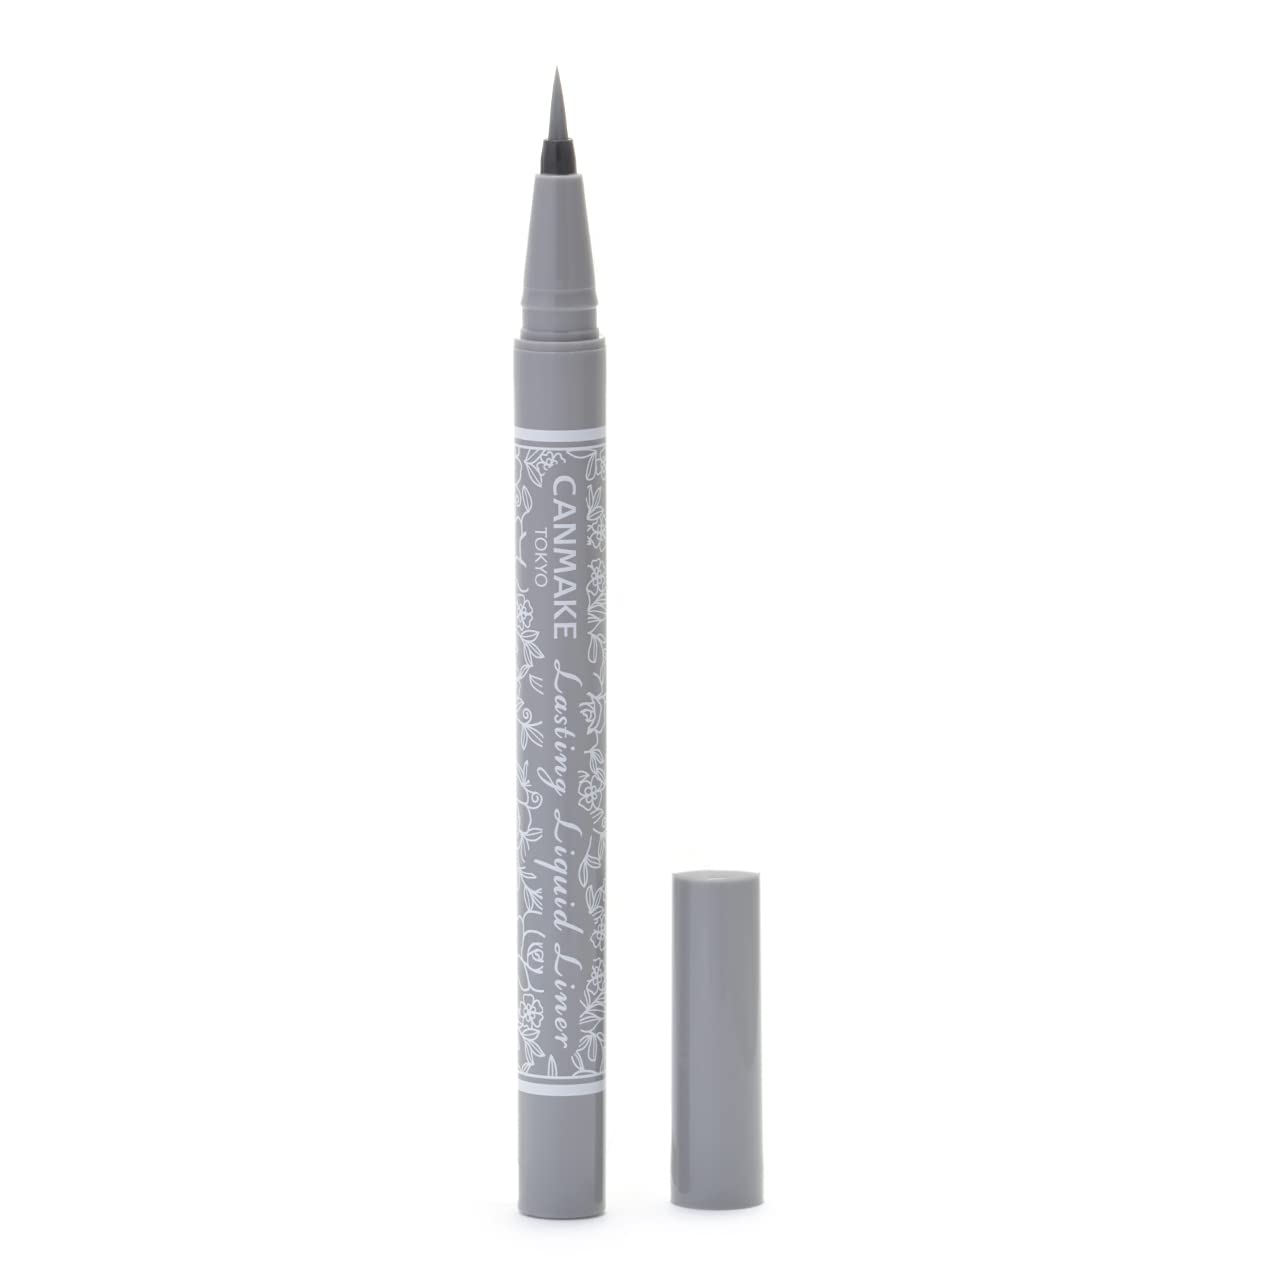 Rmk W Color Mascara 04 - High-Quality Cosmetic Product by Rmk